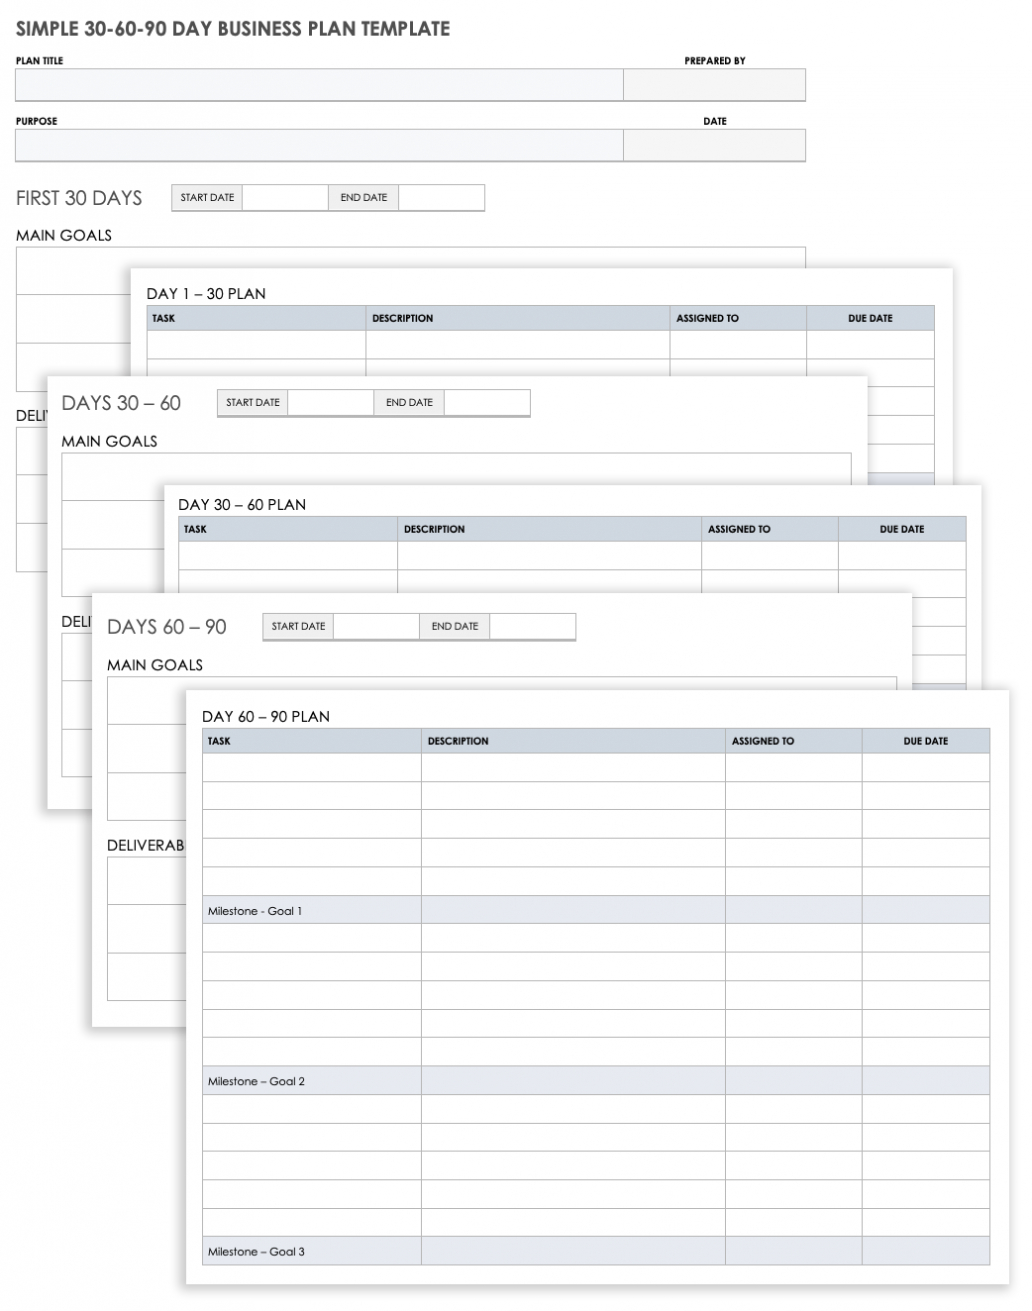 Free 30-60-90-Day Business Plan Templates | Smartsheet for 30 60 90 Day Plan Template Word